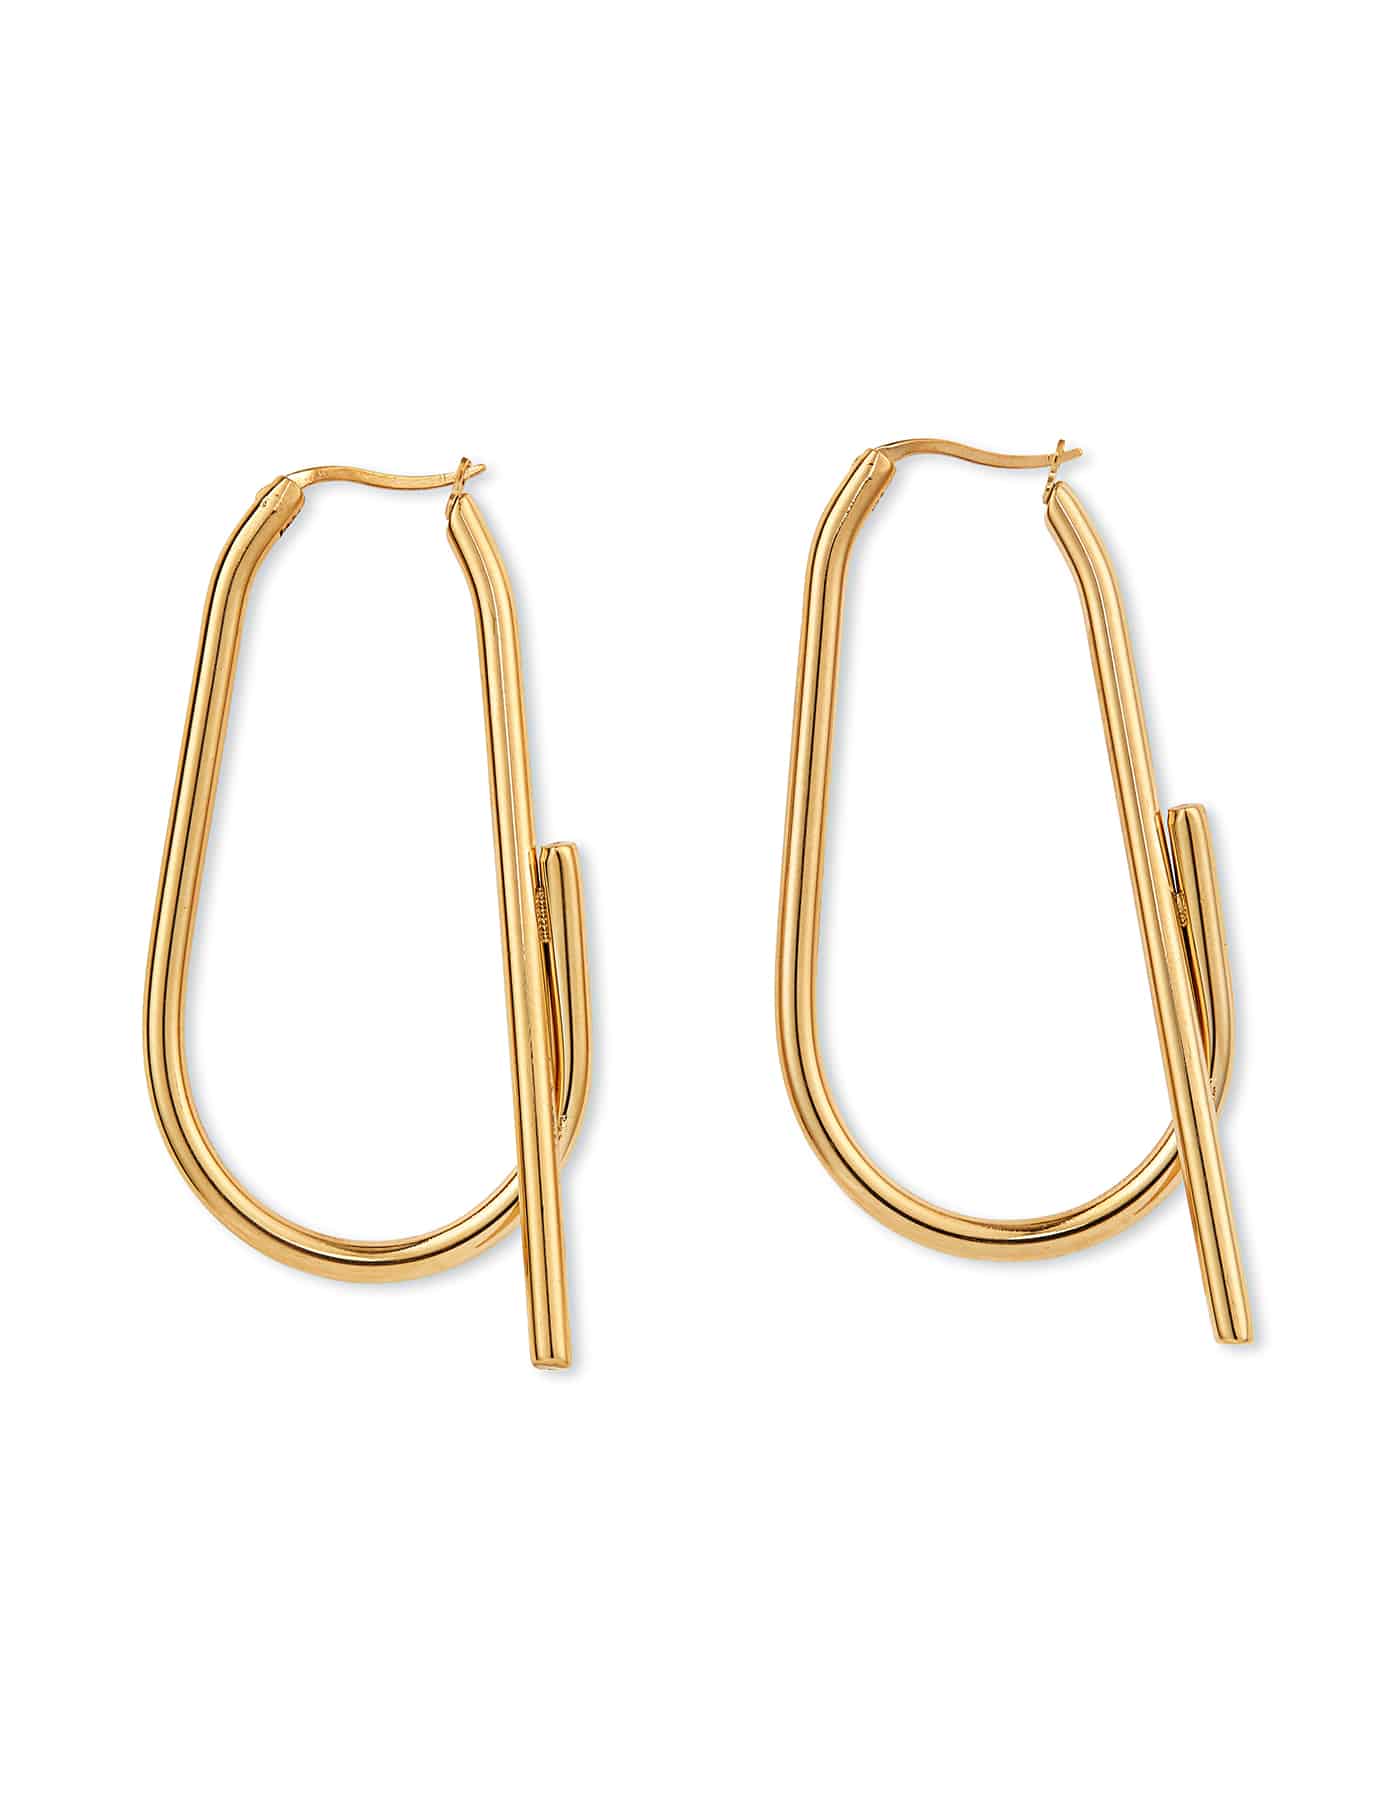 Gold Abstract Hoop Earrings, Forever Lasting - Nordicmuse